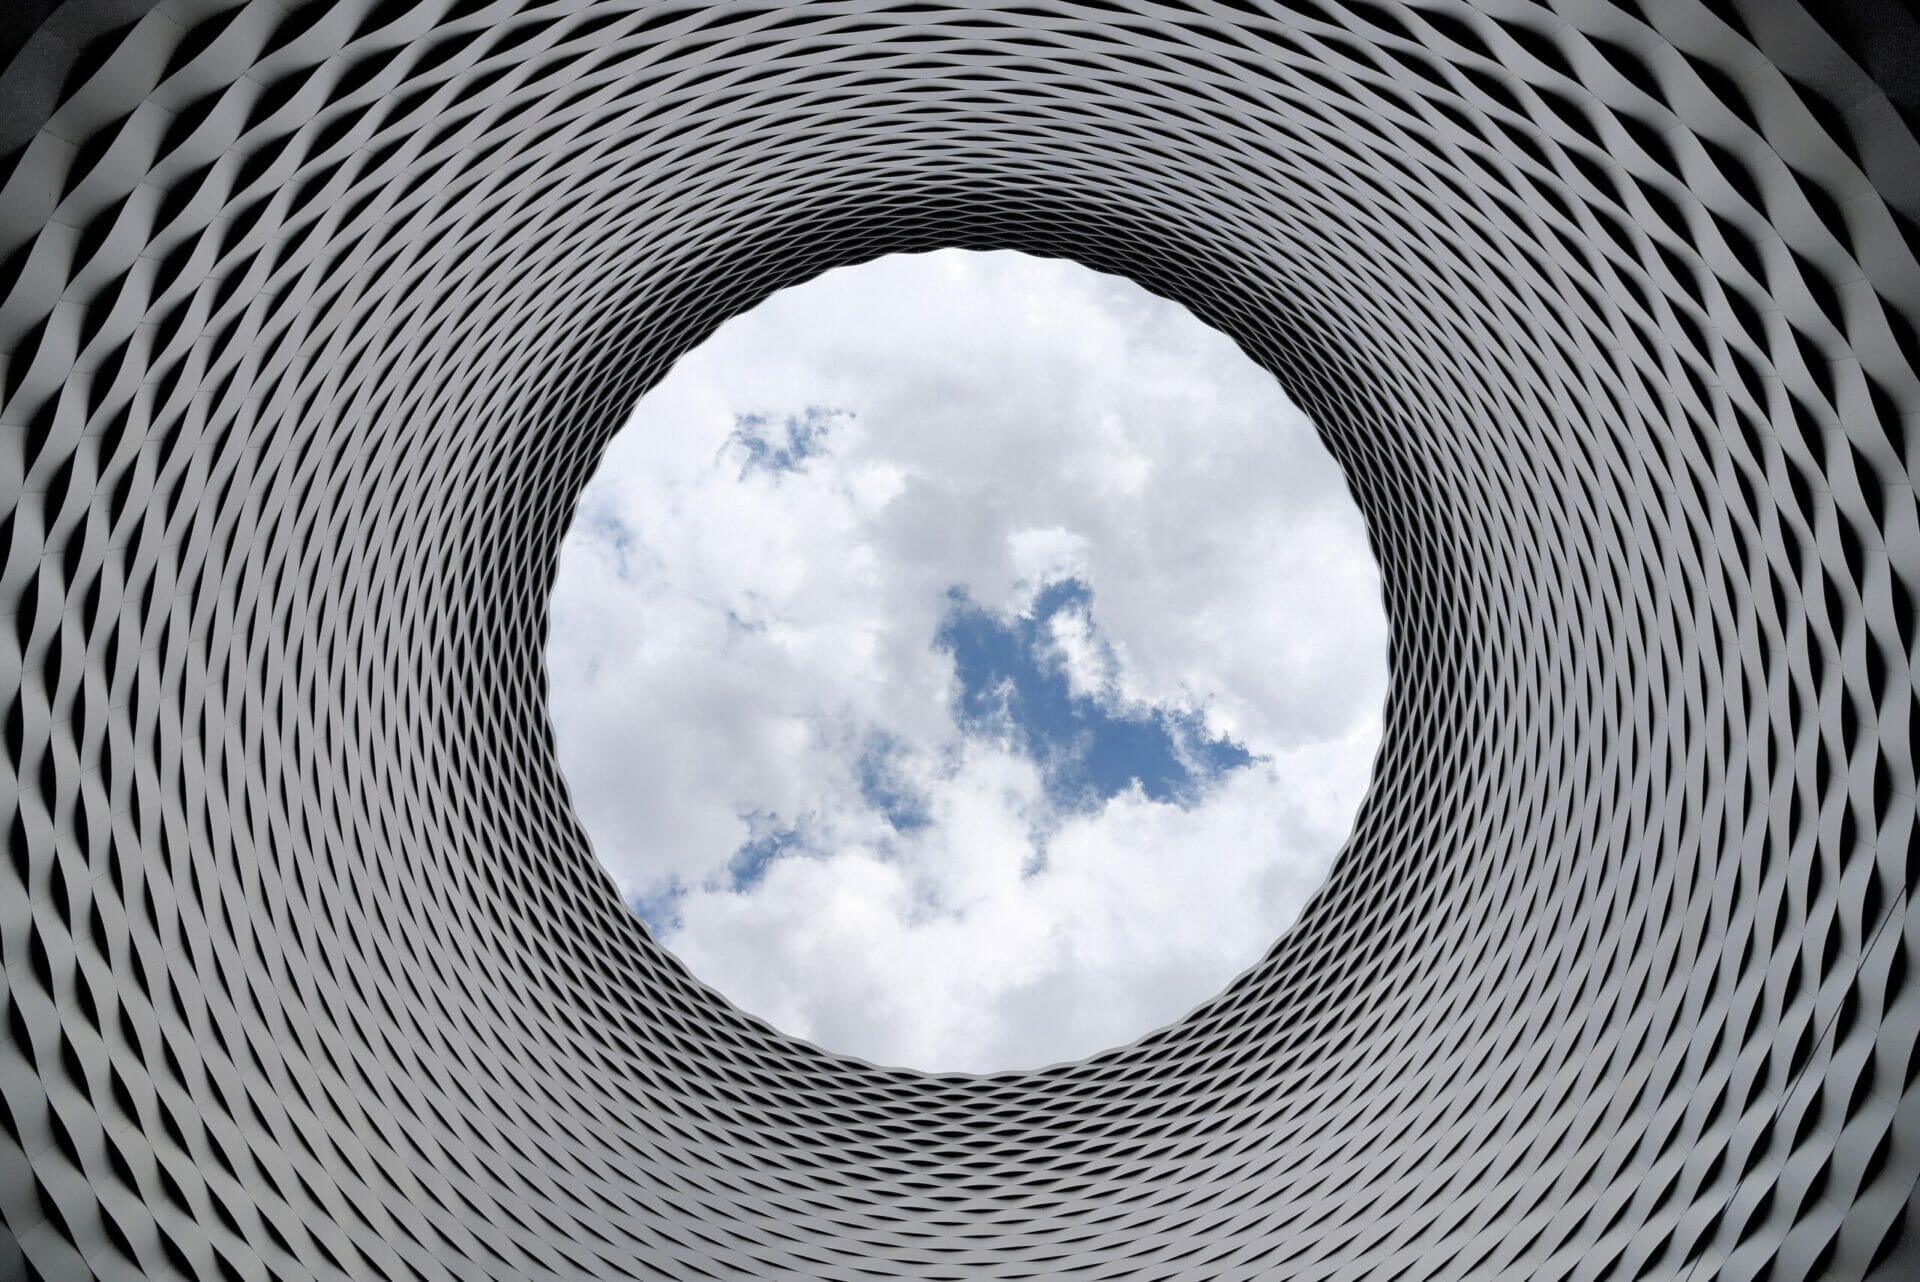 View through a geometric metal funnel of the cloudy sky